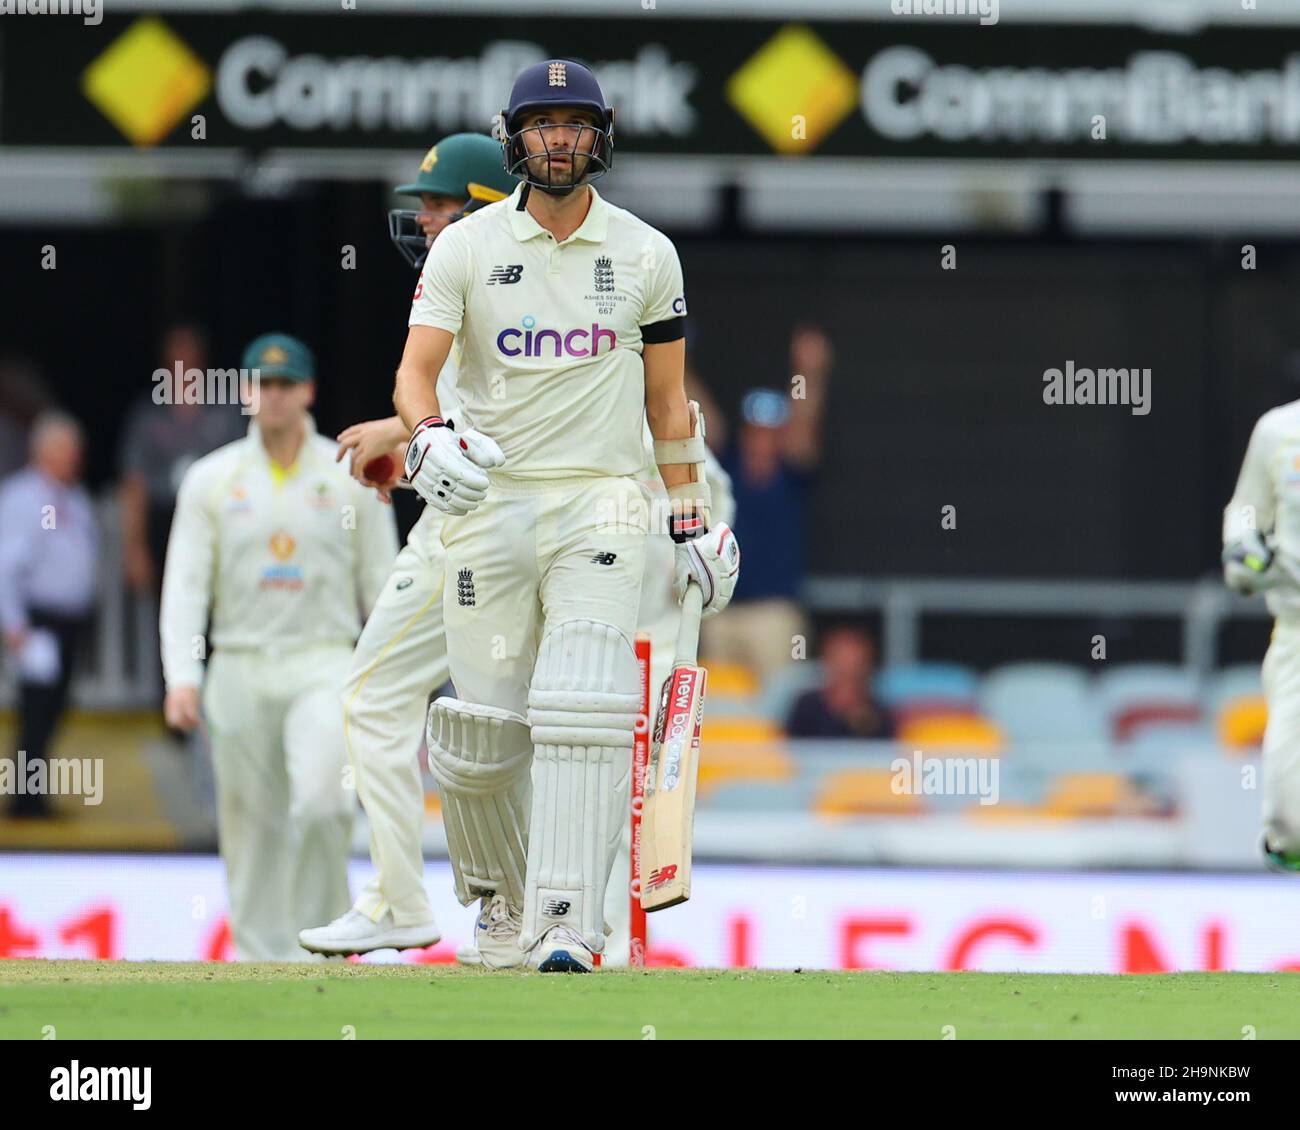 Mark Wood edges the ball and is caught by Marcus Harris. Wood exits the field. Stock Photo